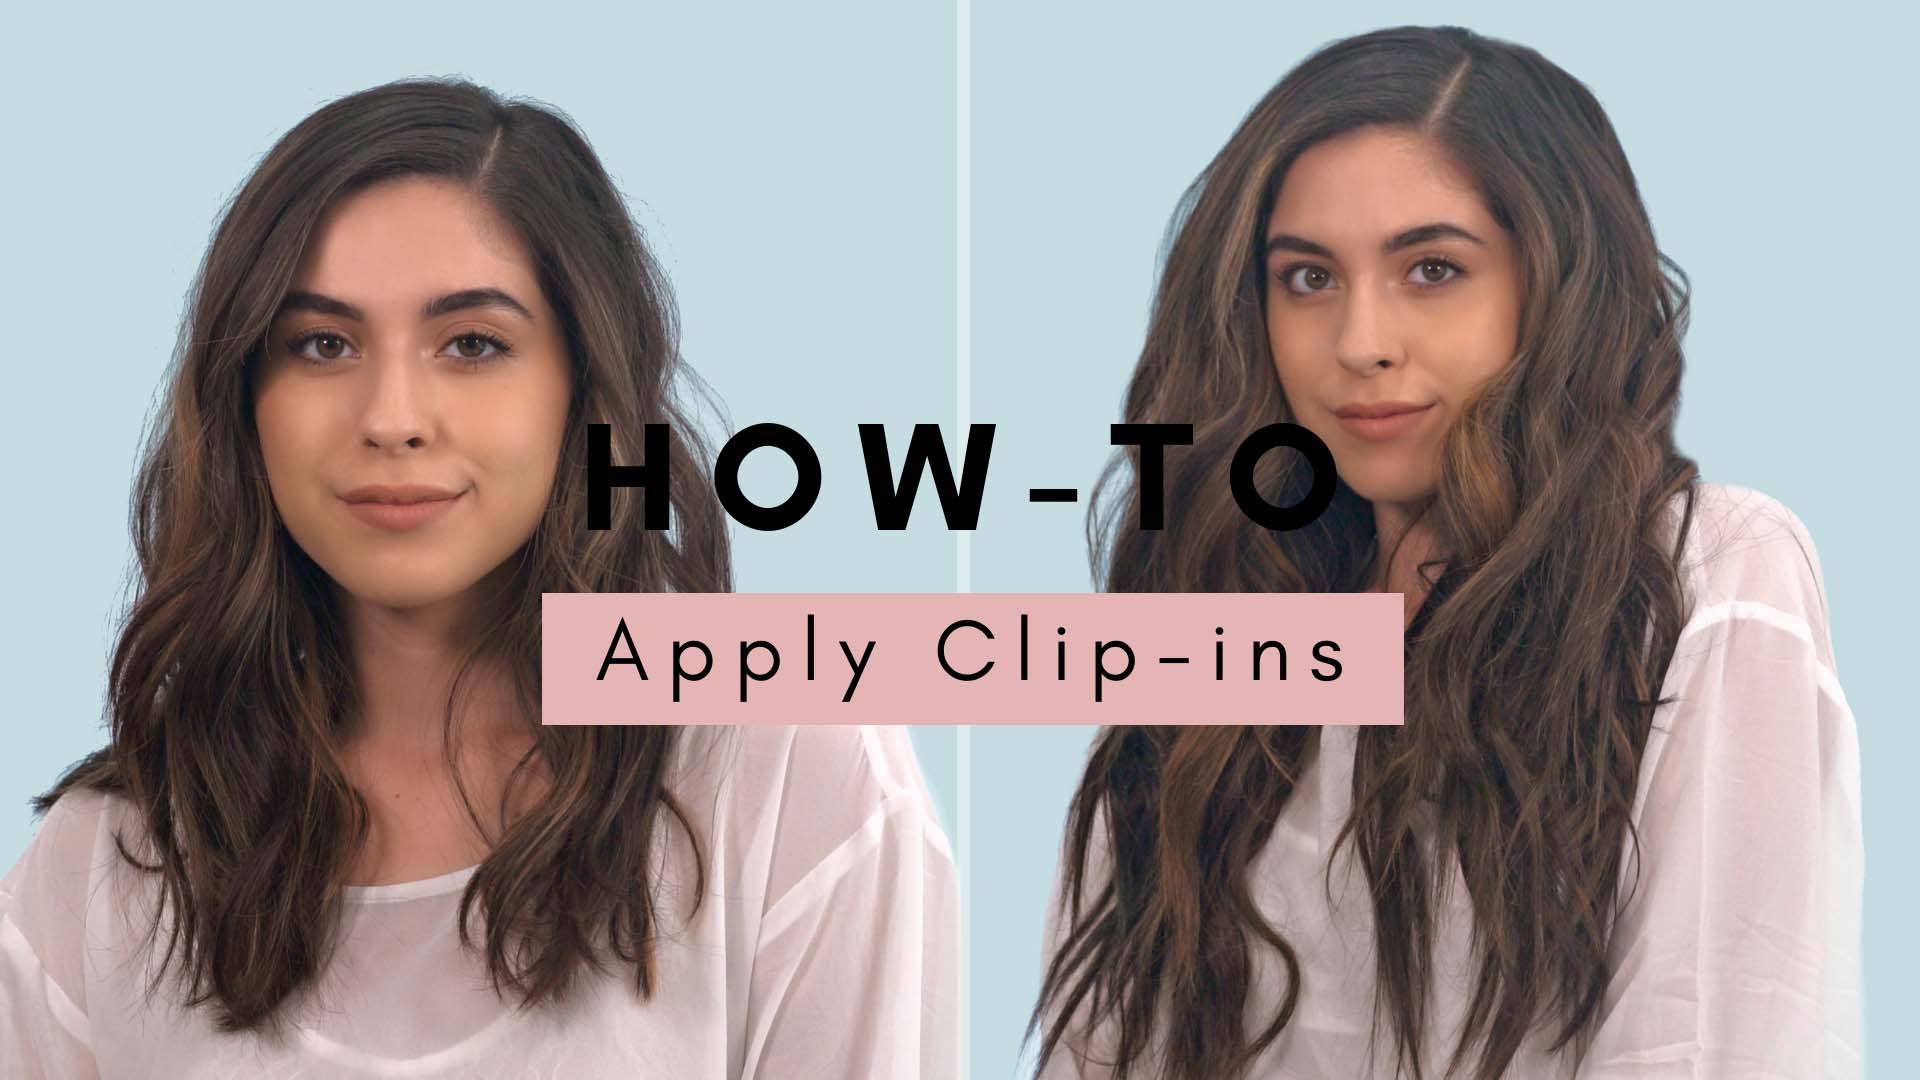 How-to Apply Clip-ins tutorial